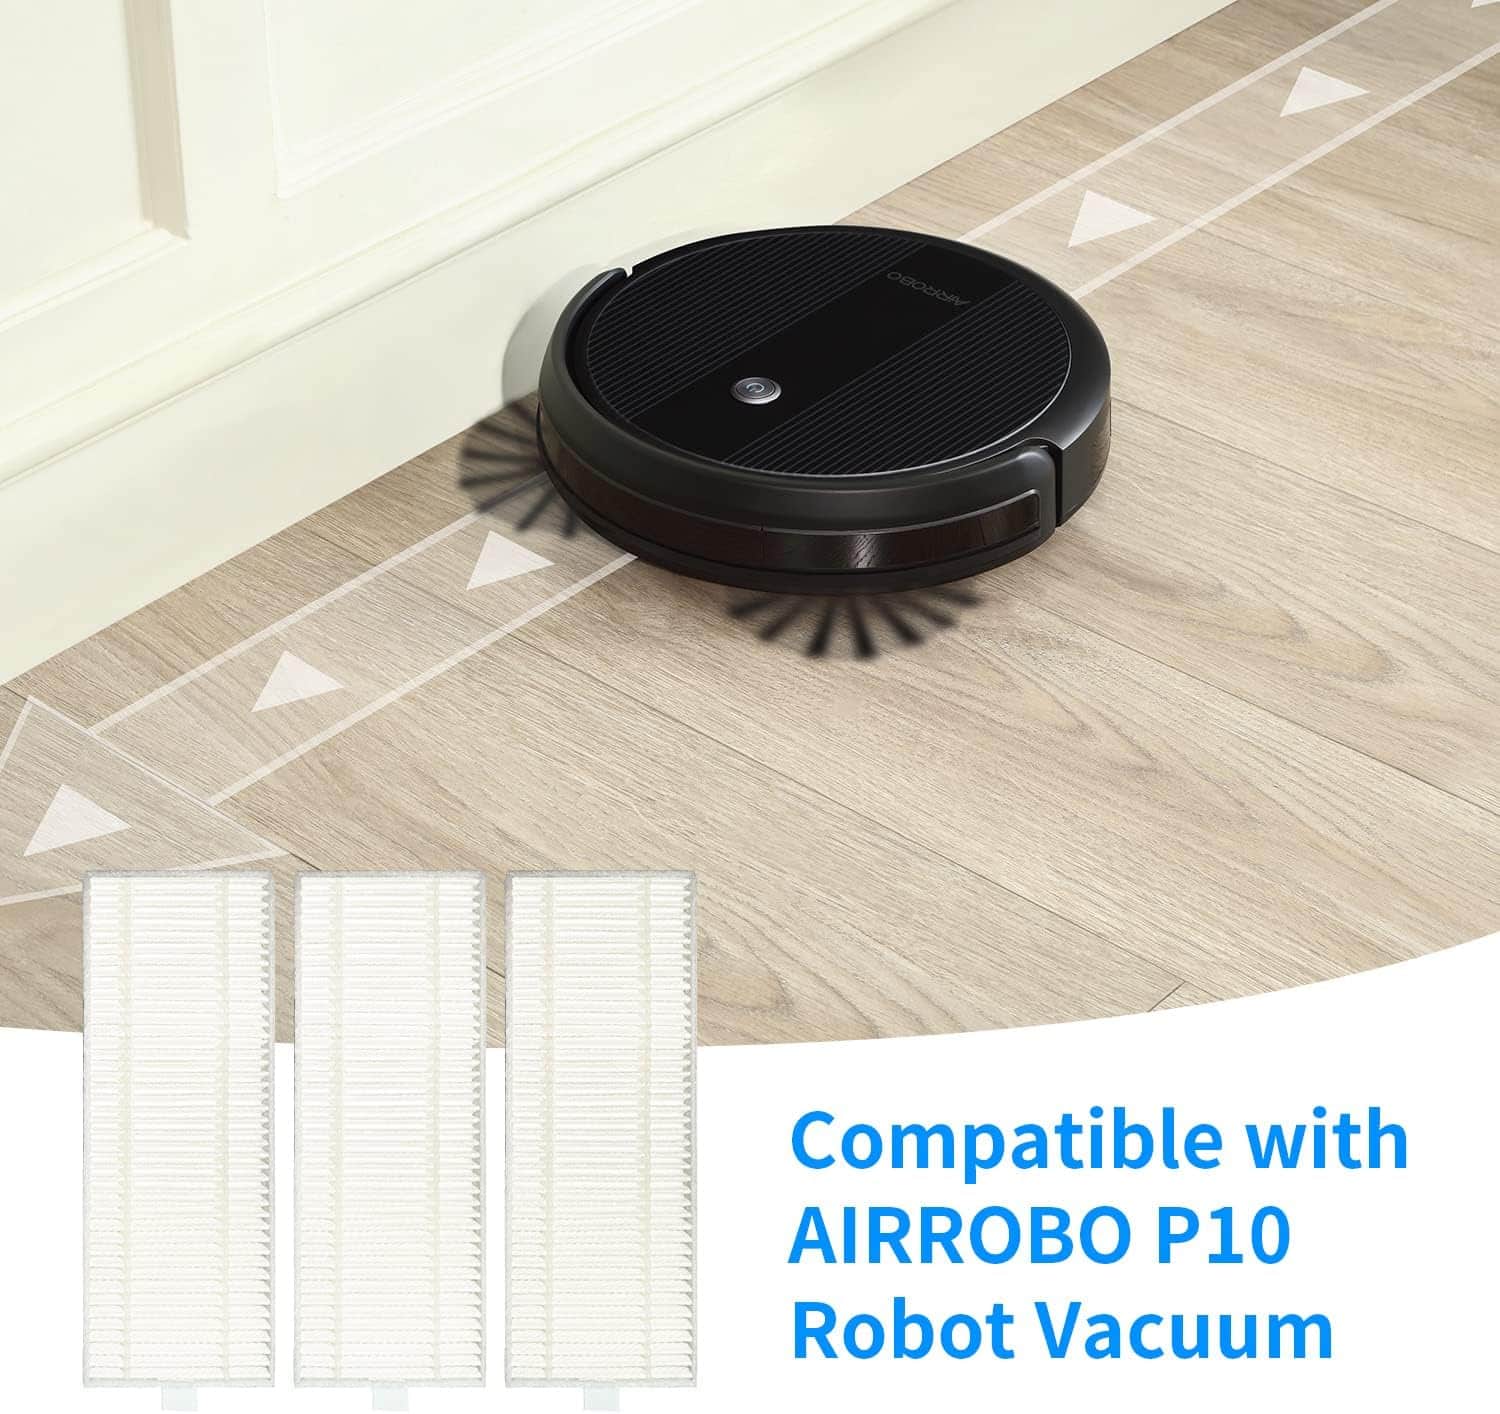 AIRROBO Replacement Filters P10 Robot Vacuum Cleaner: A Must-Have for Effective Cleaning